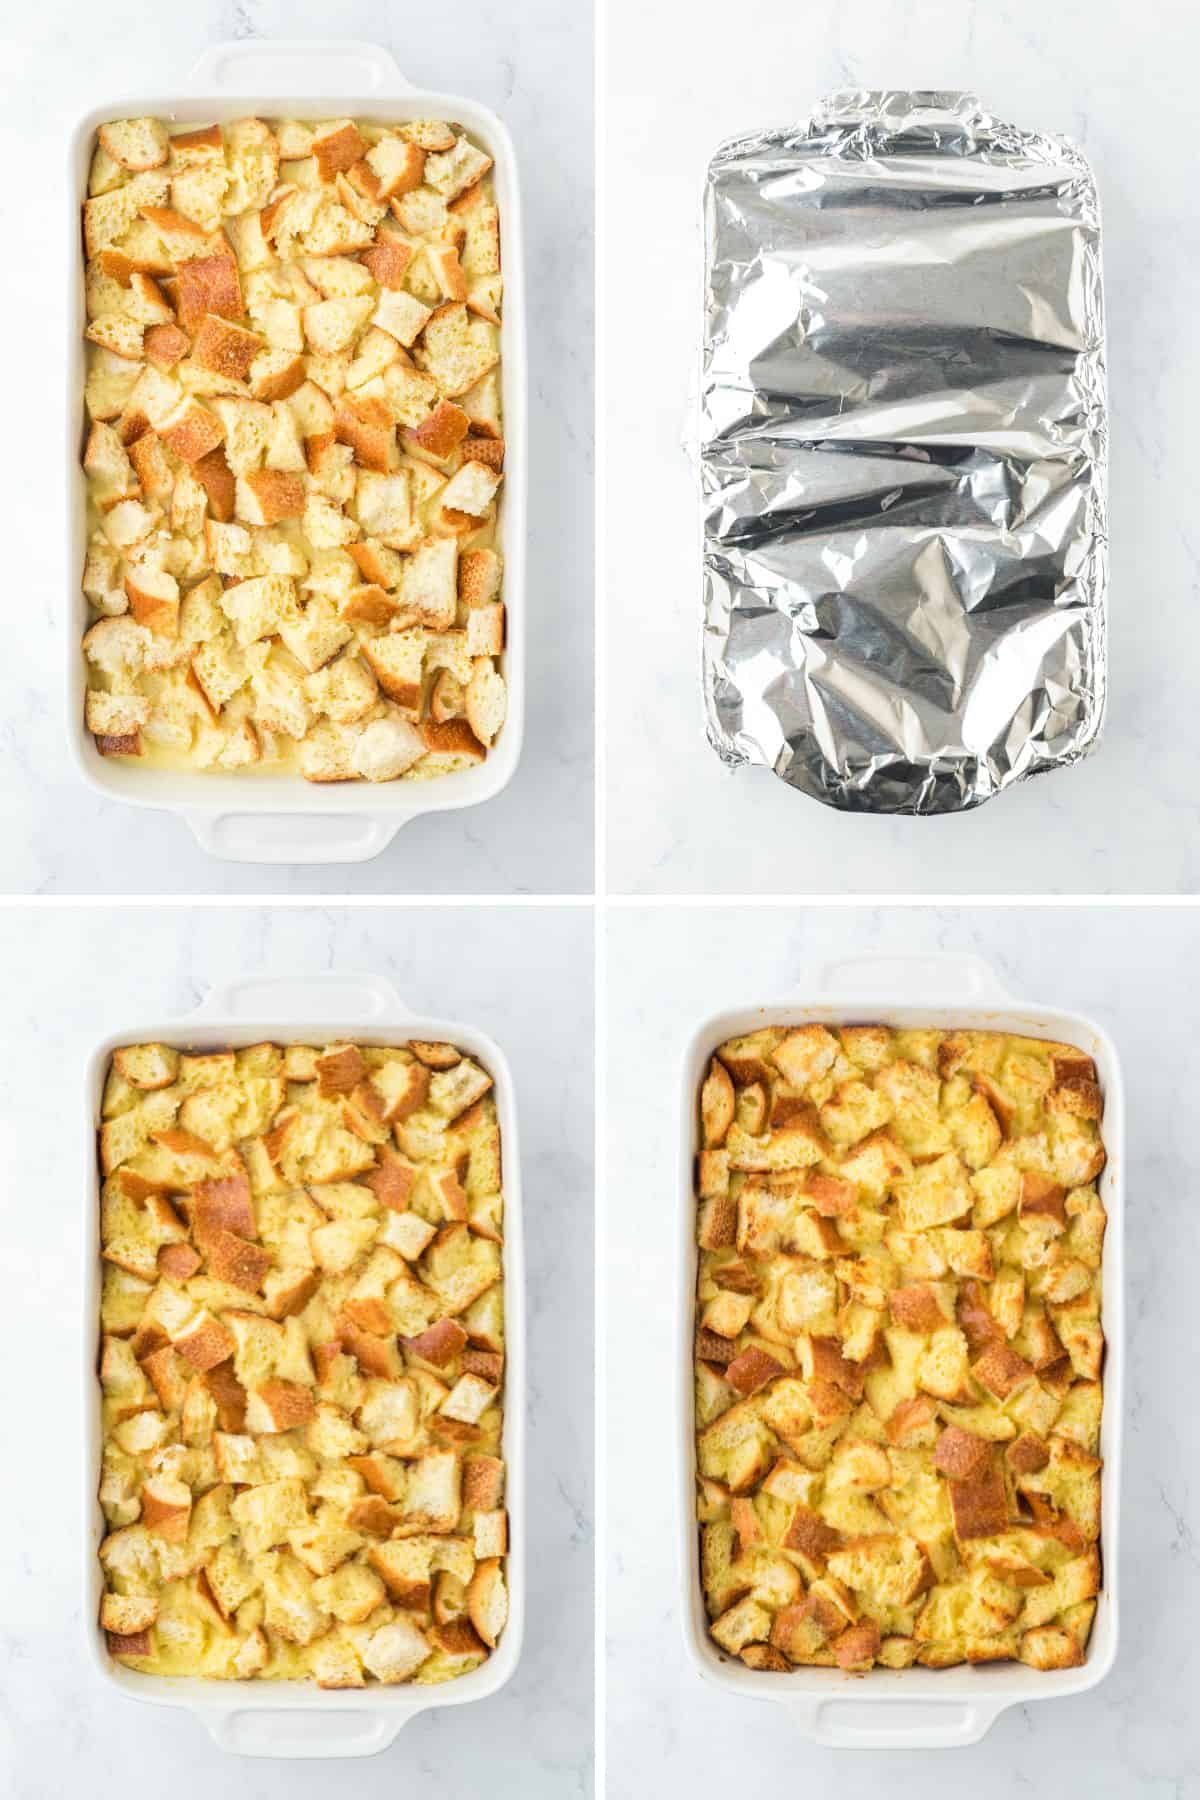 Collage of steps to make white chocolate bread pudding with pouring the white chocolate mixture over the bread, covering the bread with foil, and baking it